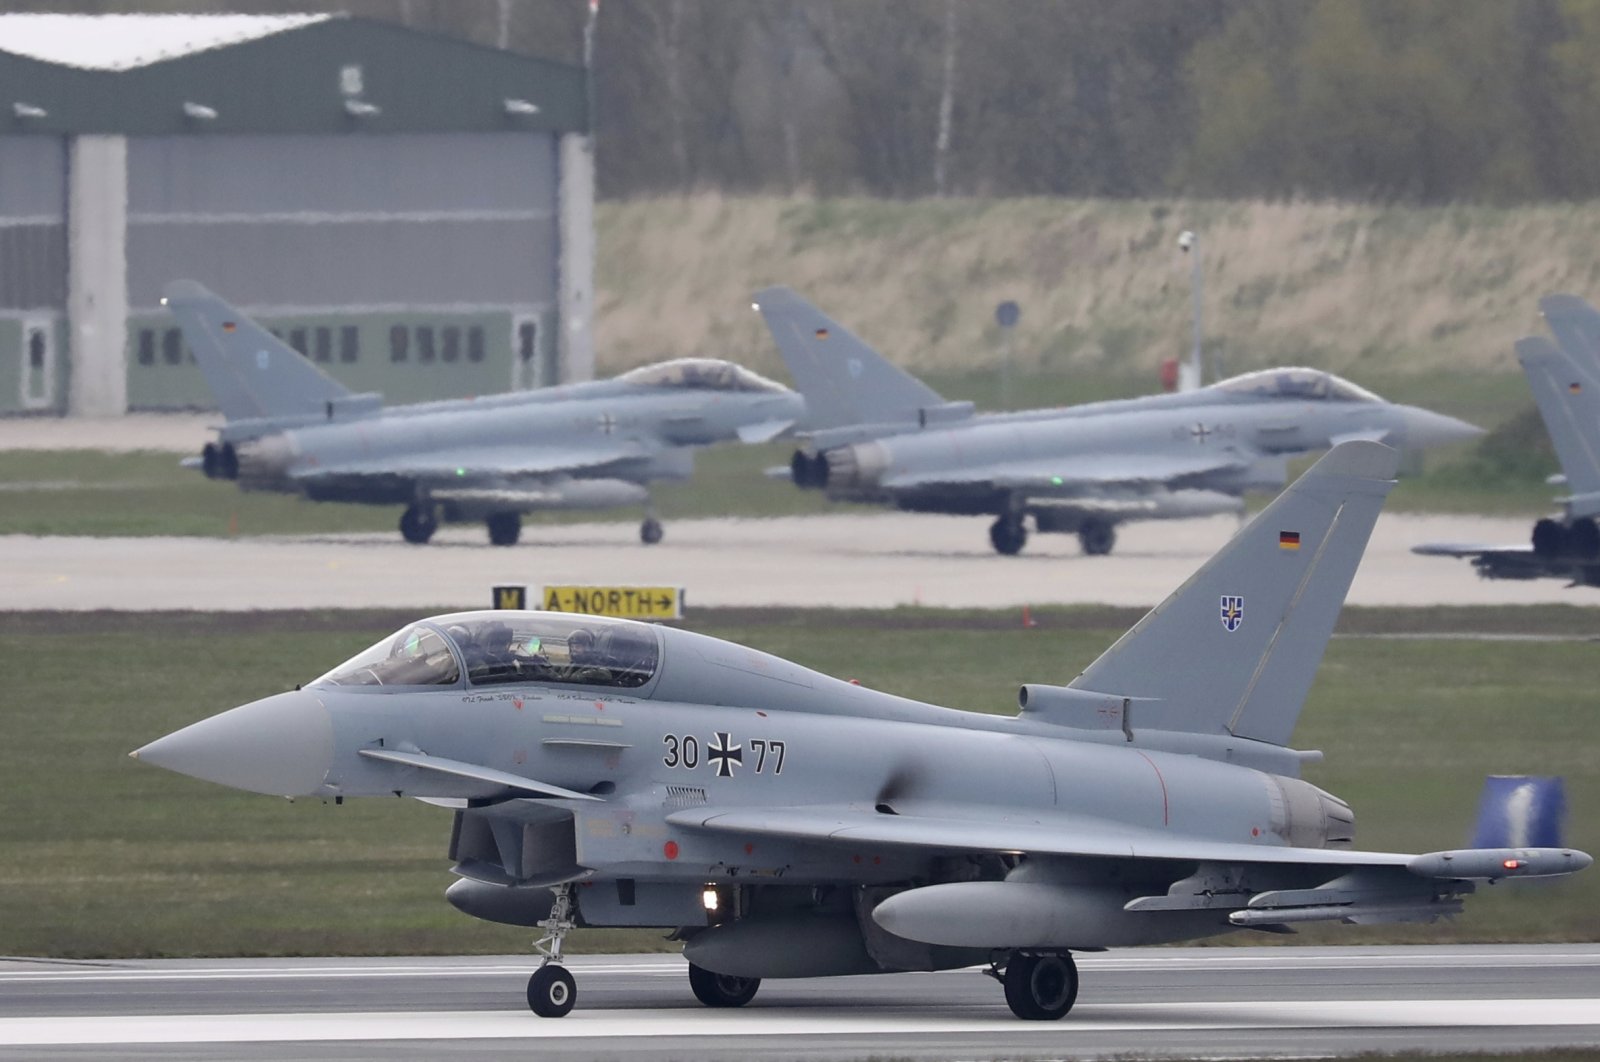 A Eurofighter from the German Air Force Weapons School takes off for an exercise in Large, Germany, April 30, 2021. (AFP Photo)